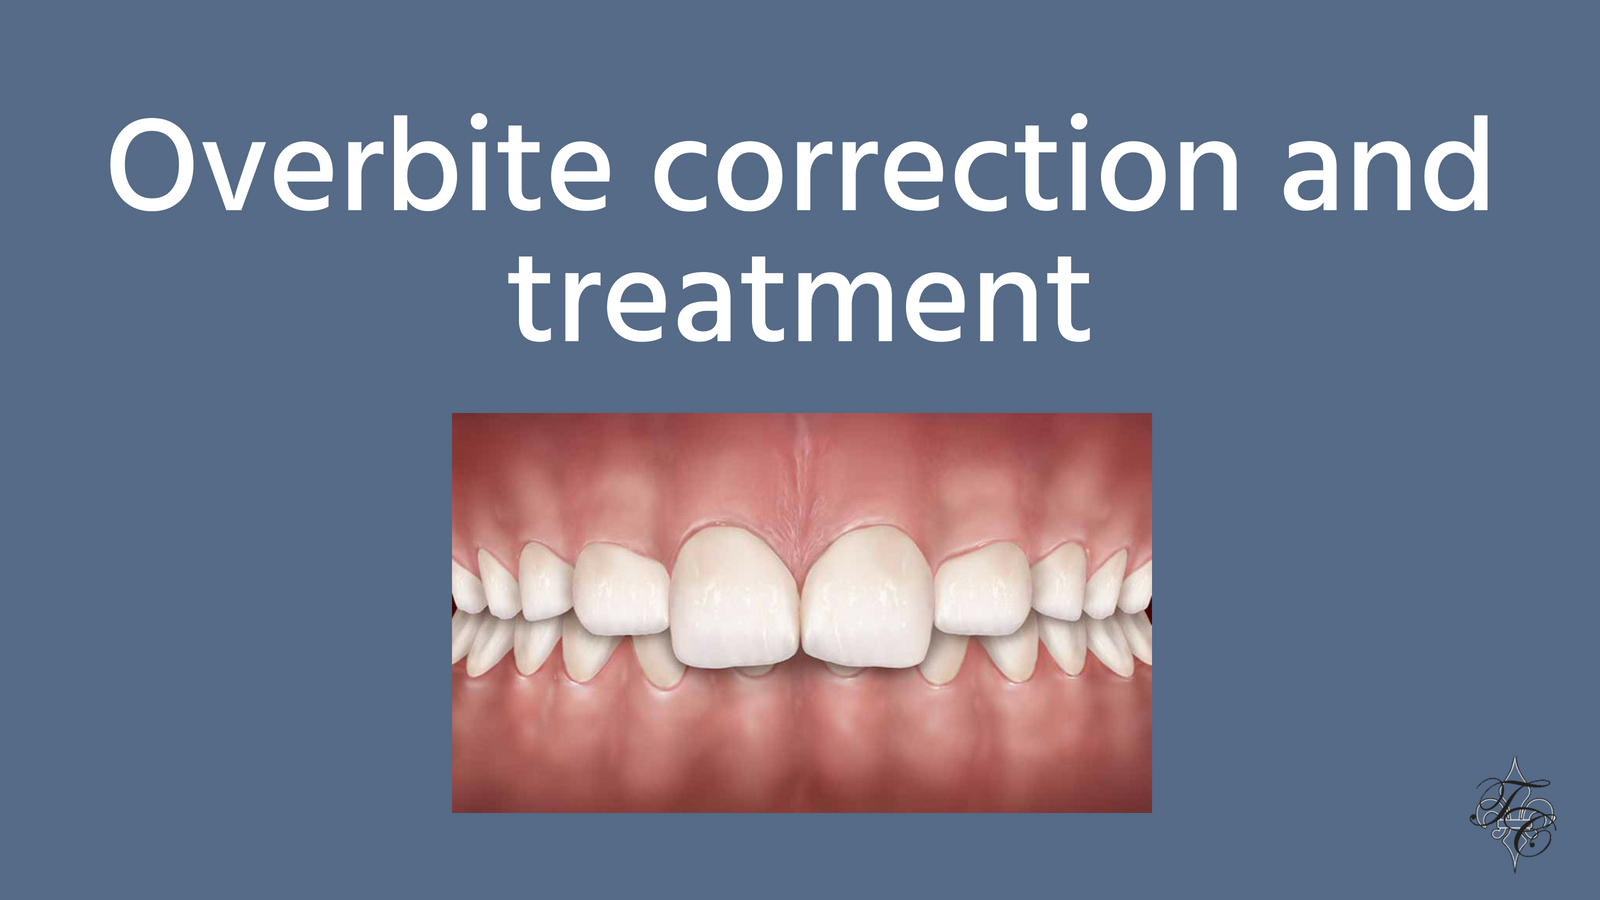 Overbite correction and treatment